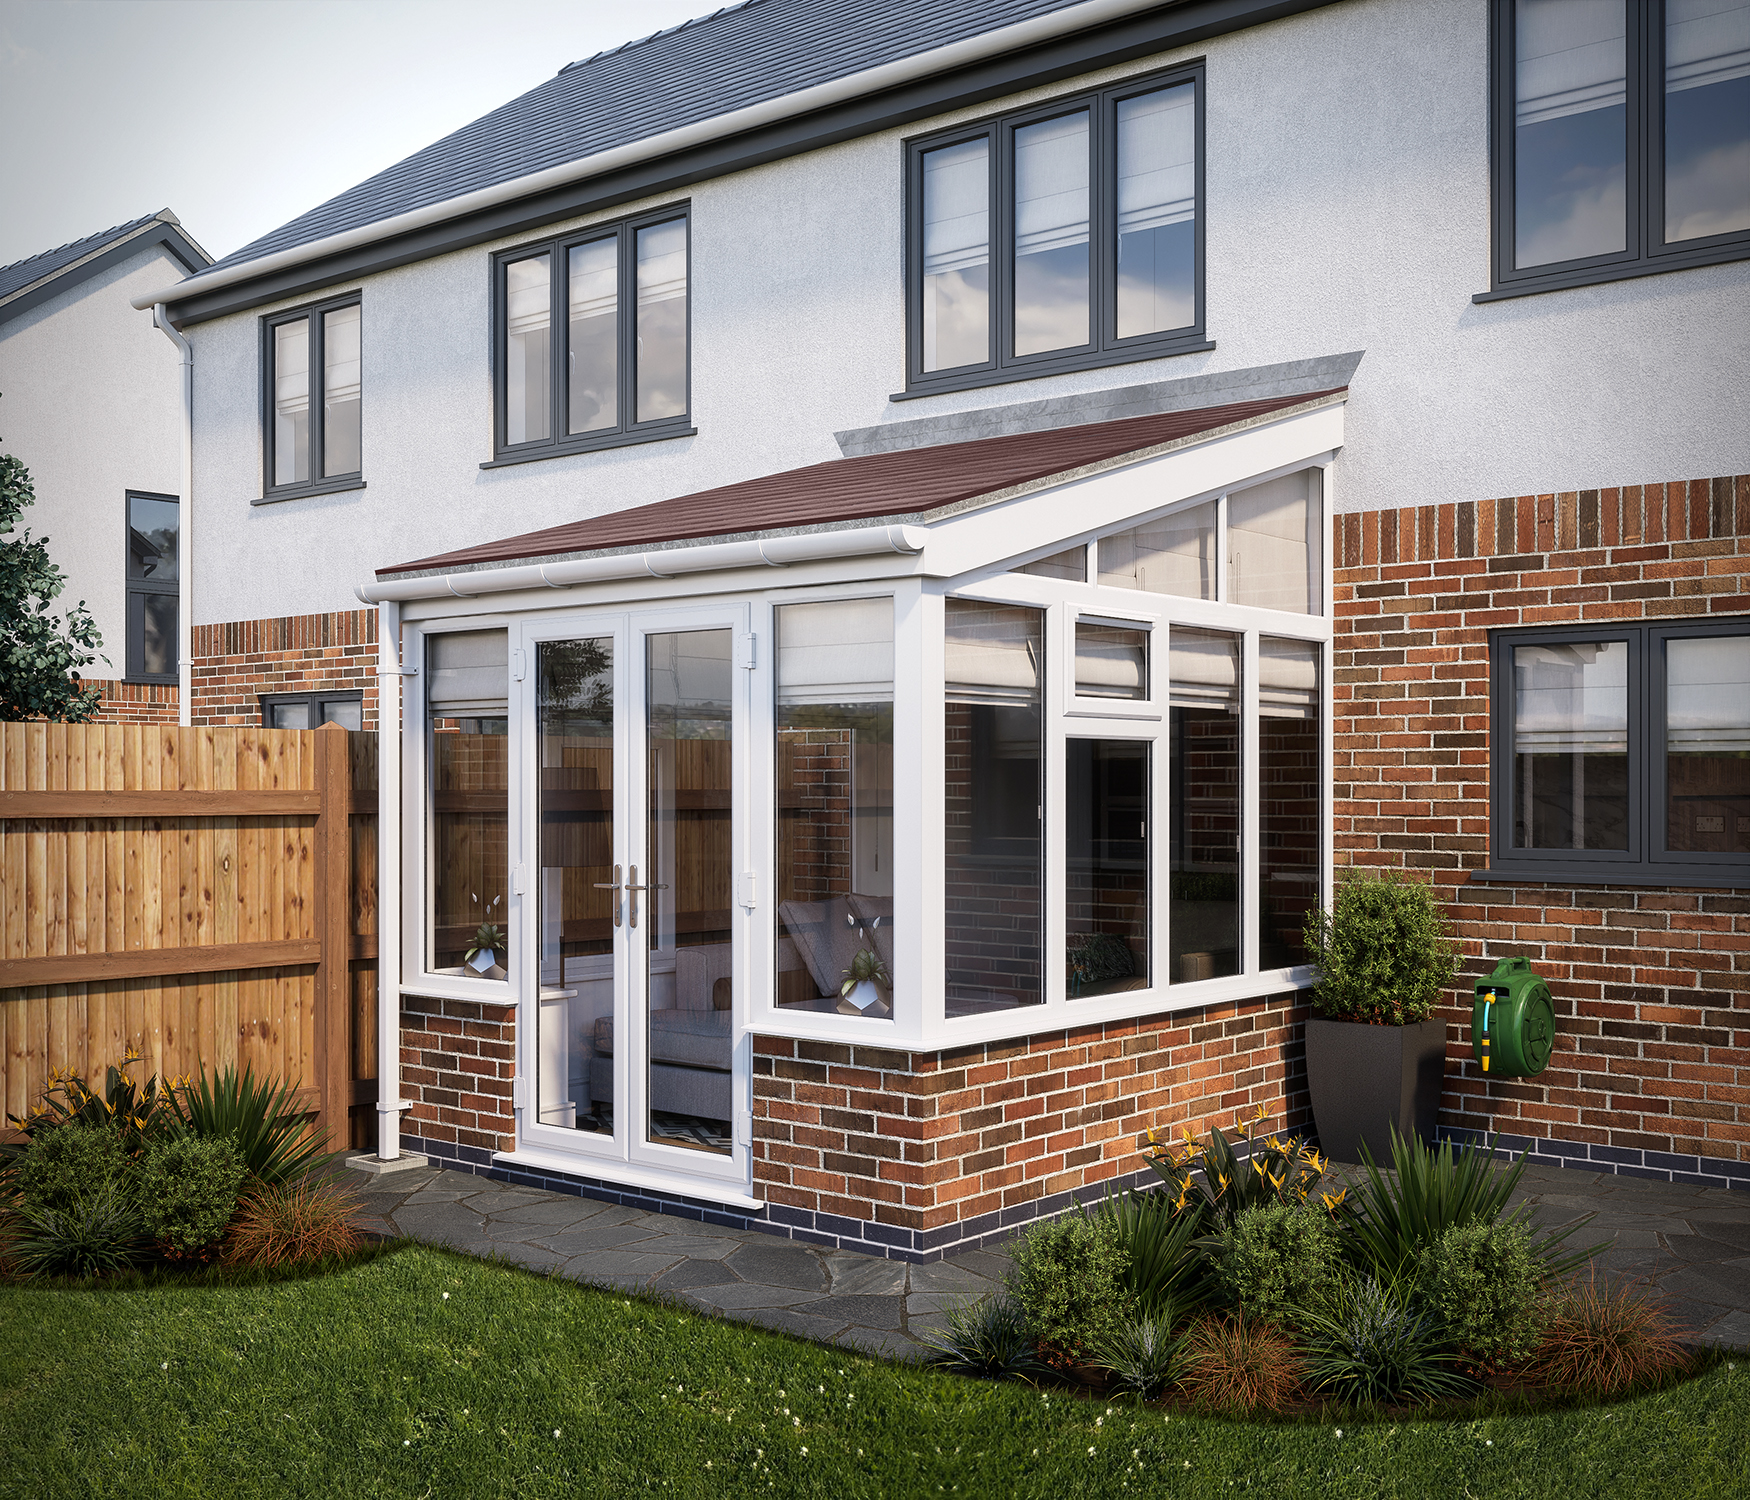 SOLid roof Lean to Conservatory White Frames Dwarf Wall with Rustic Brown Tiles